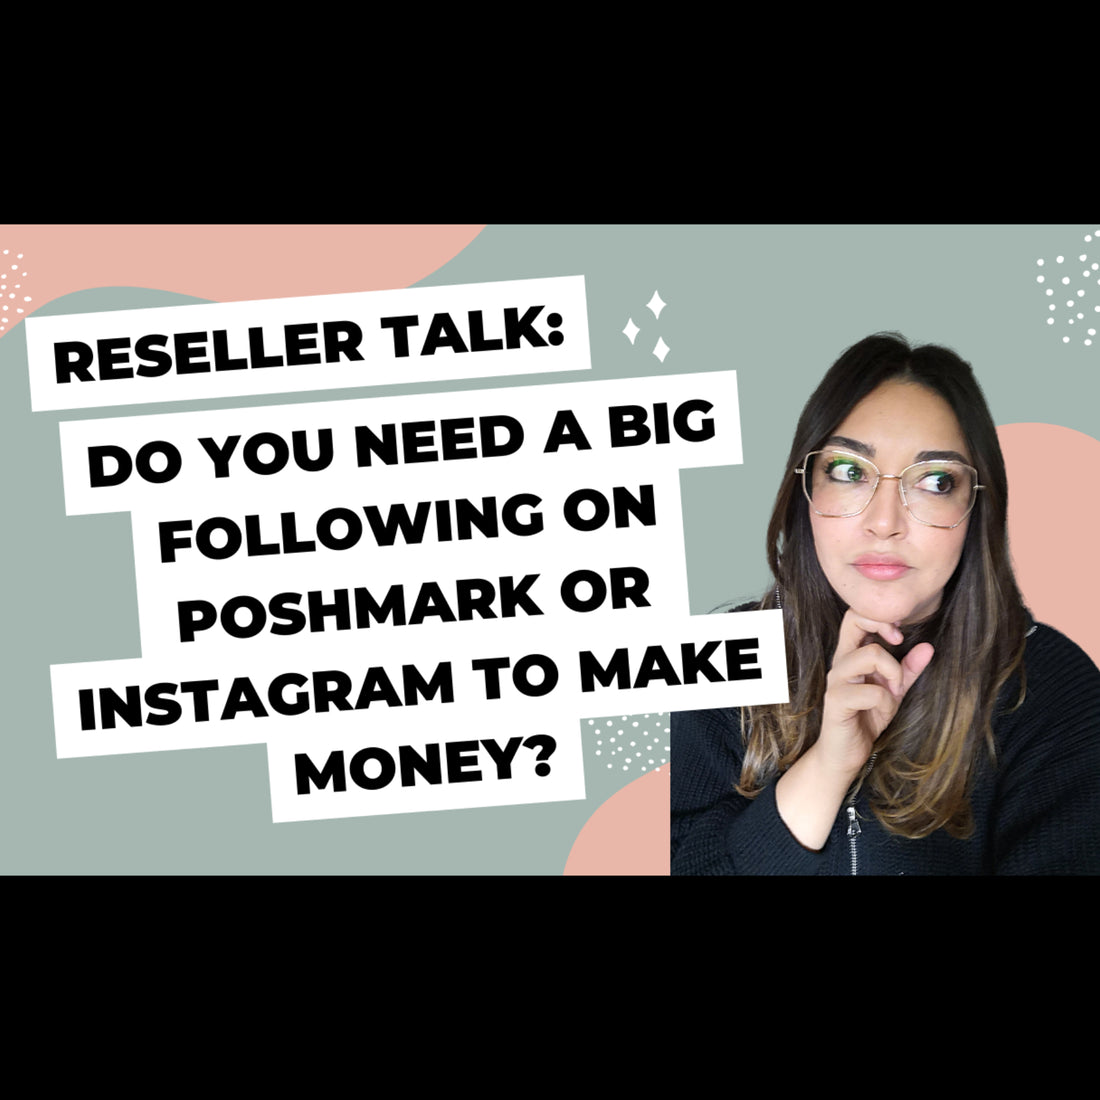 Do you need a big following on Poshmark or Instagram to make good money? It depends...